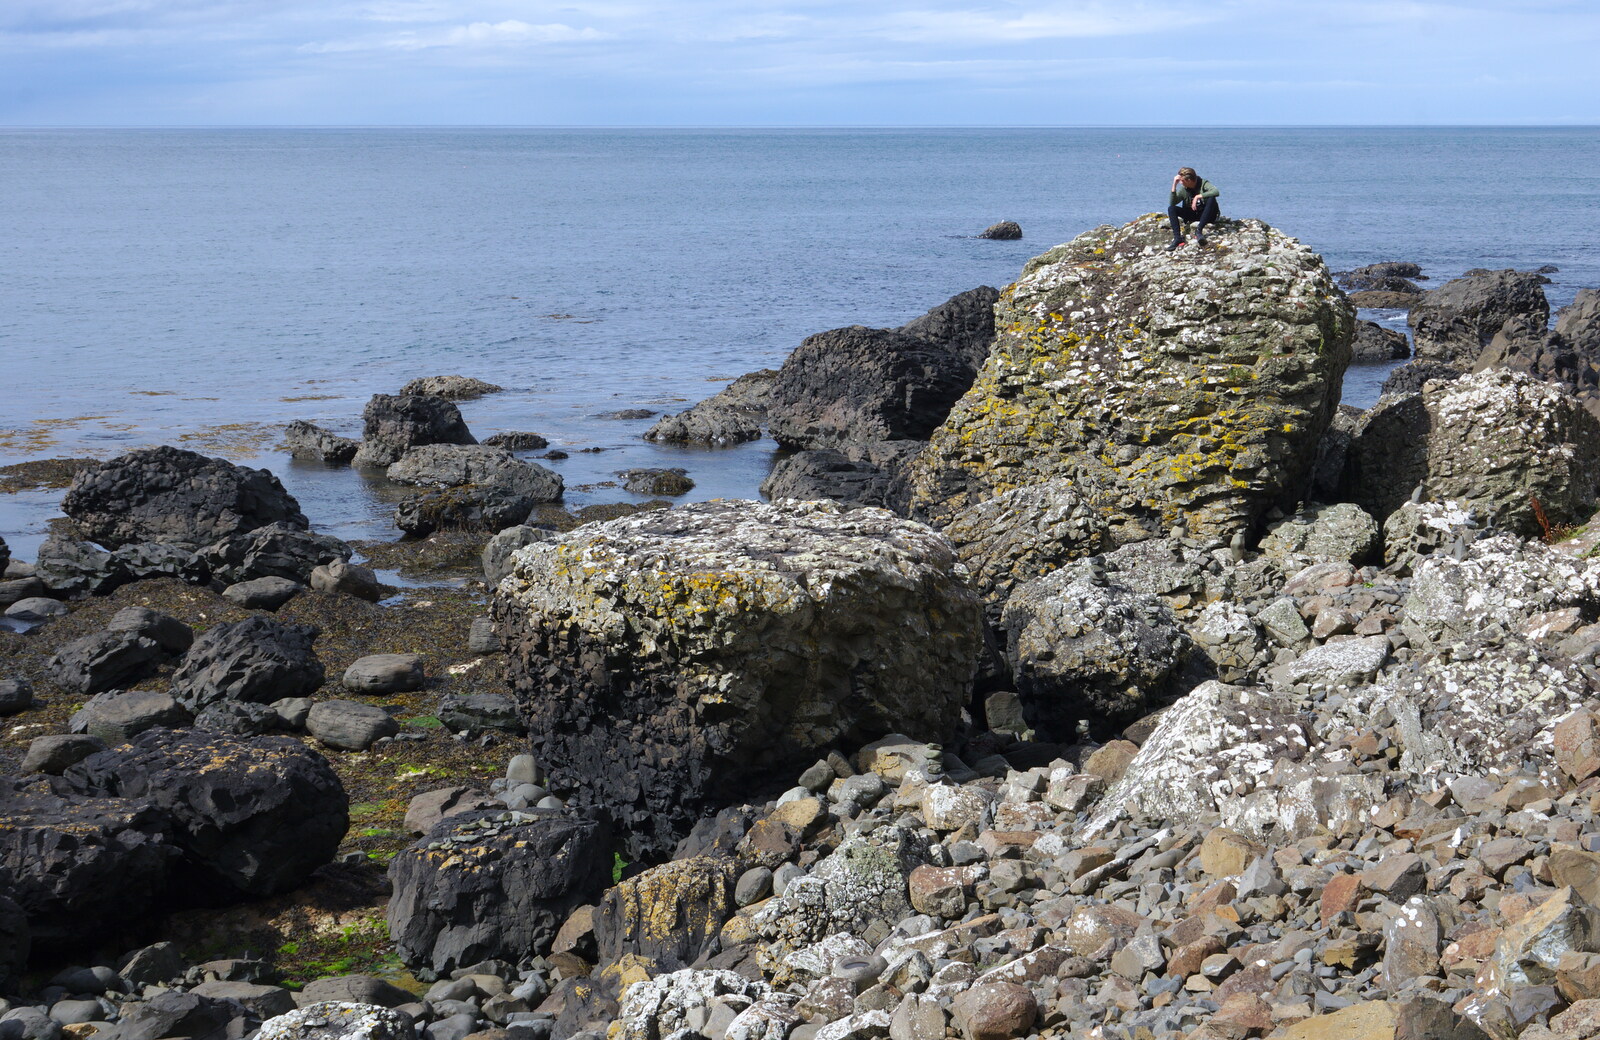 Some dude sits on a rock from The Giant's Causeway, Bushmills, County Antrim, Northern Ireland - 14th August 2019